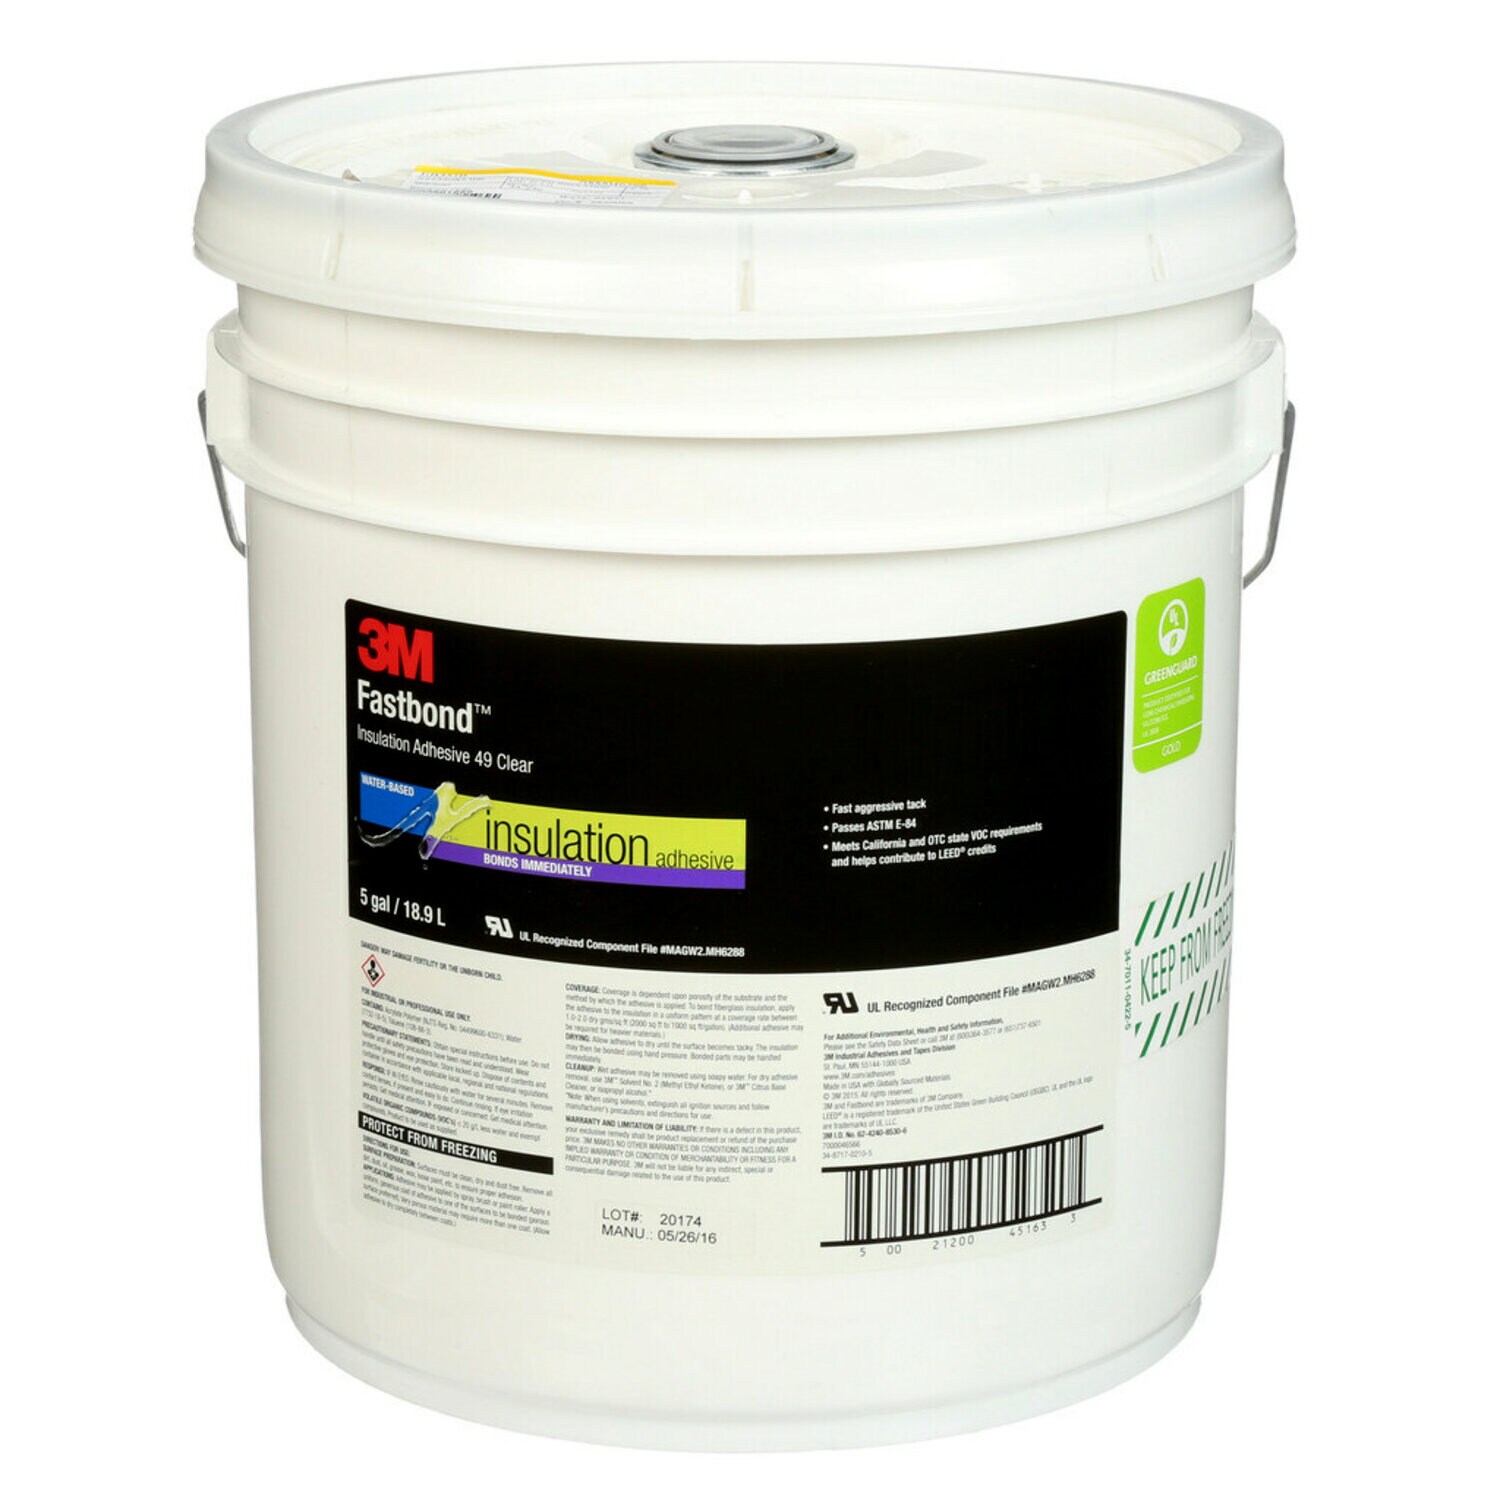 7000046566 - 3M Fastbond Insulation Adhesive 49, Clear, 5 Gallon Drum (Pail)